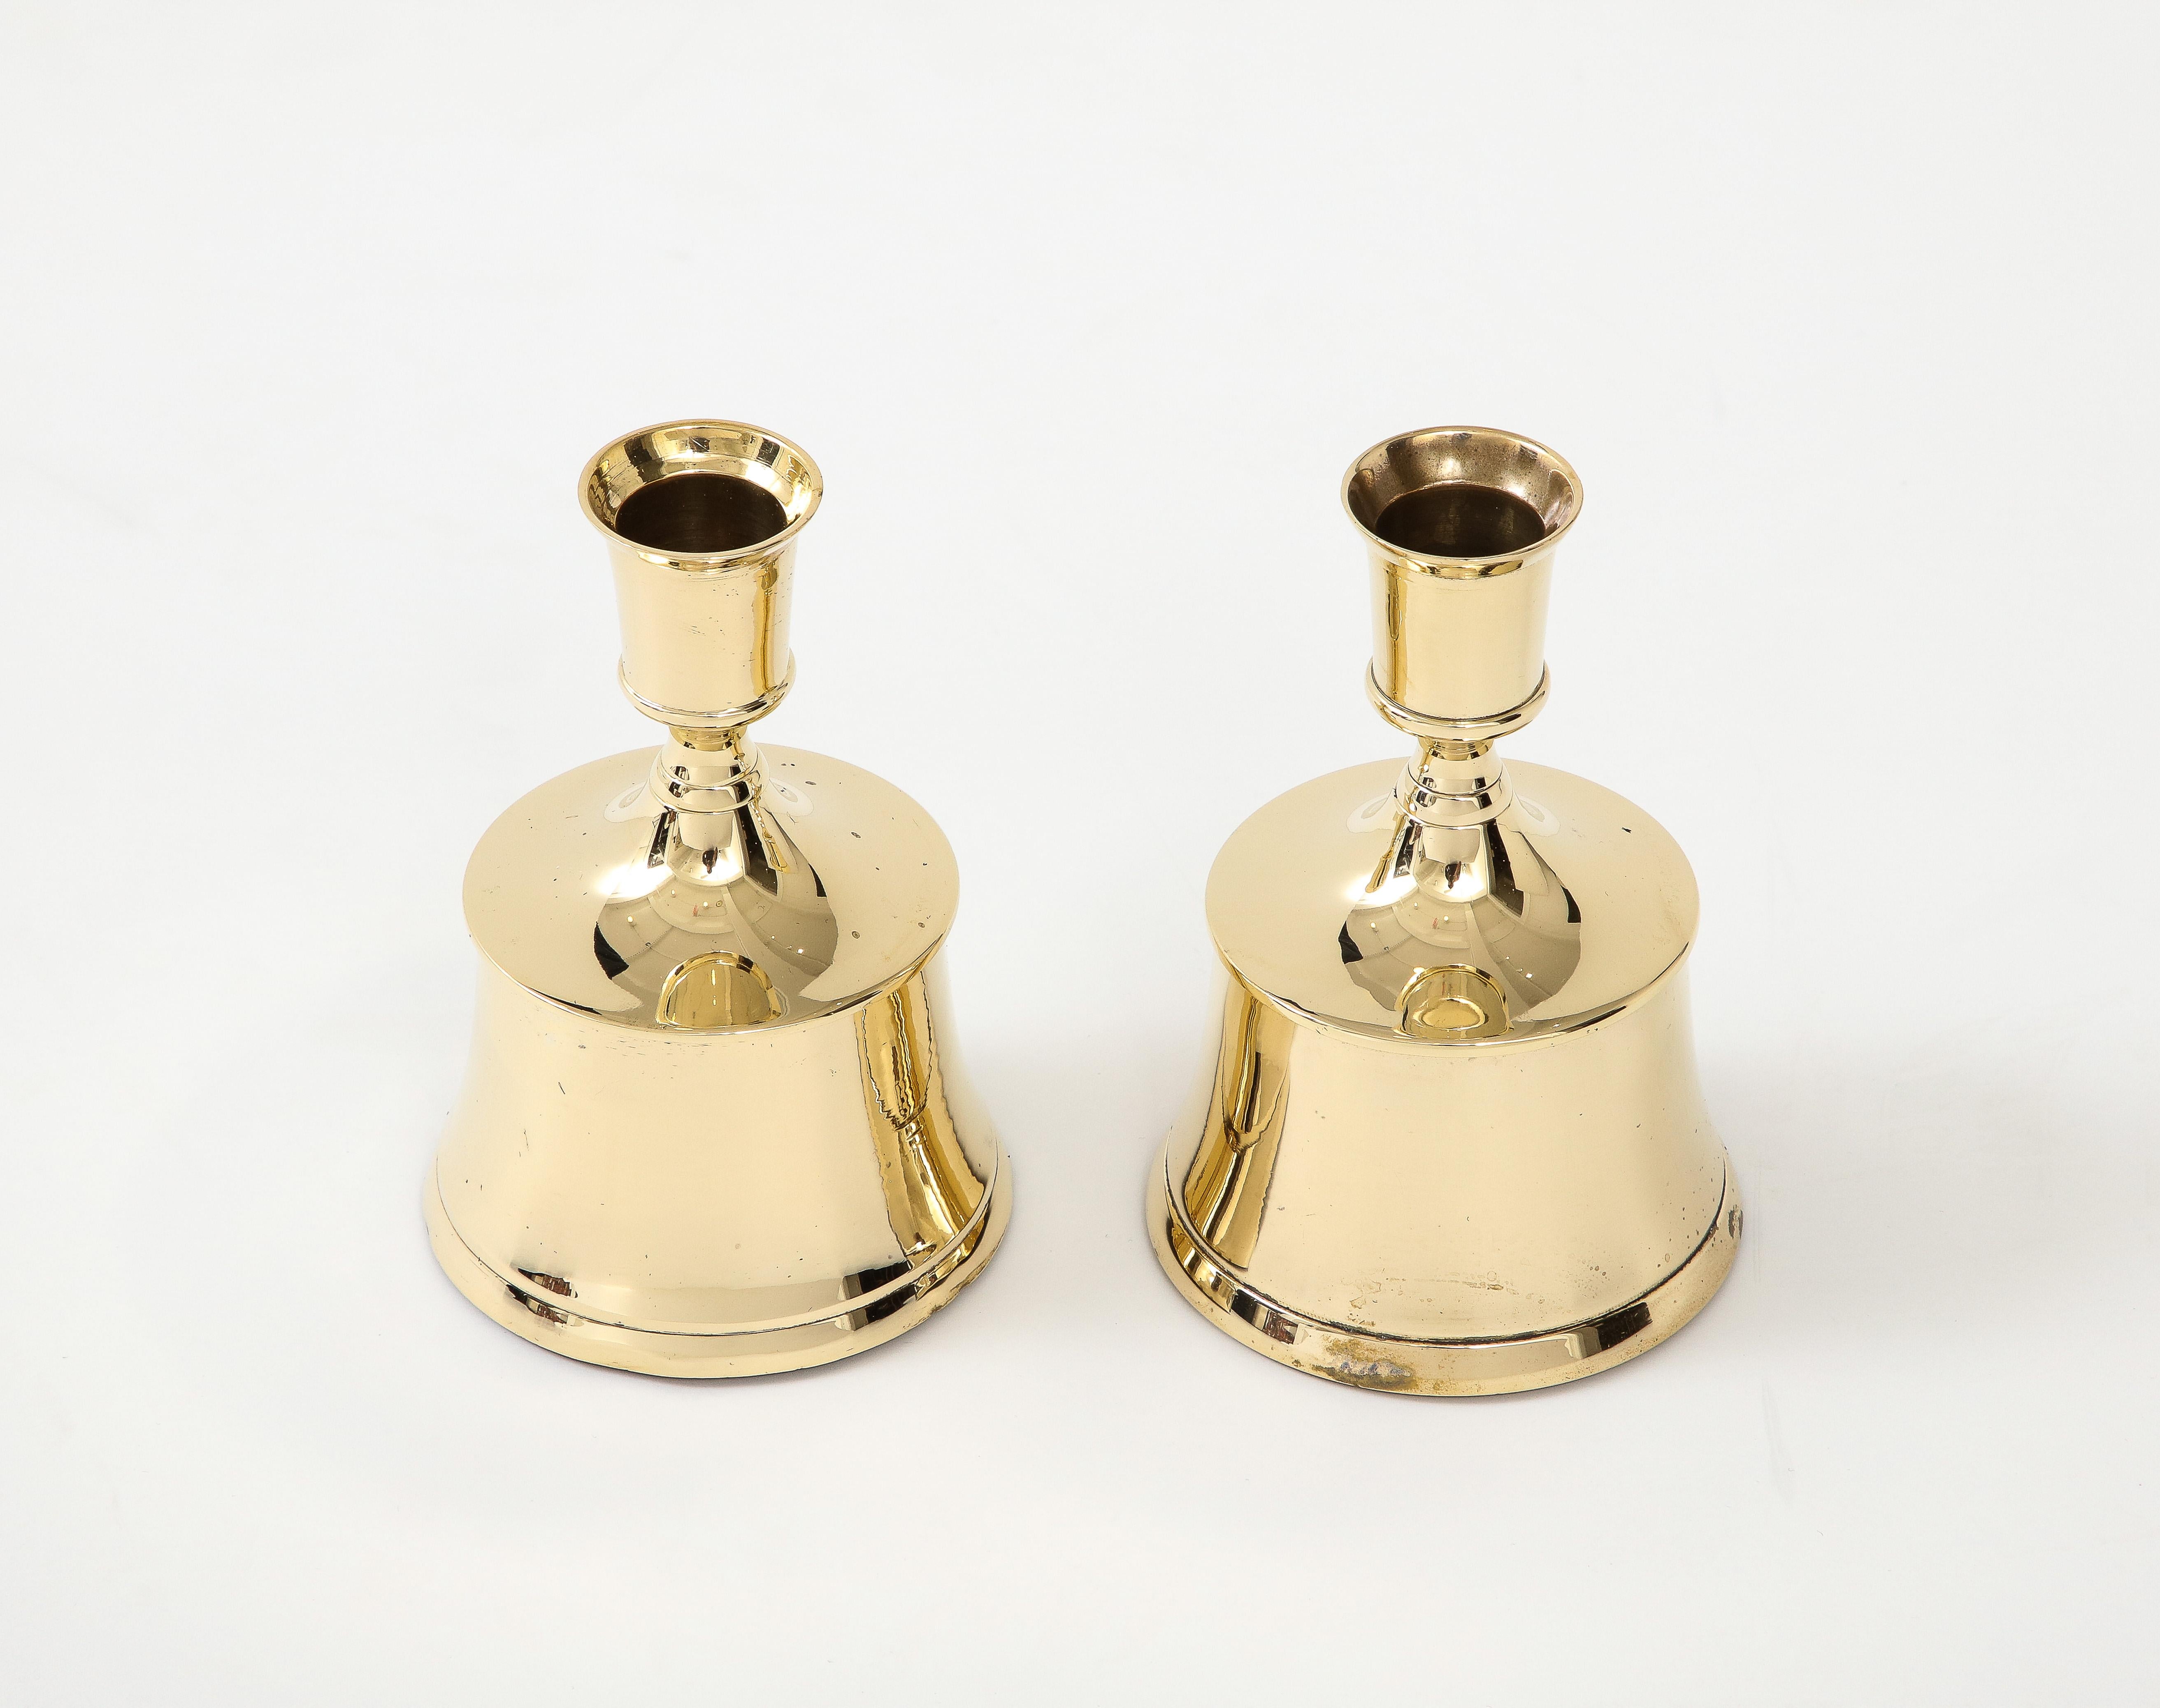 Tommi Parzinger Brass Candlesticks In Excellent Condition For Sale In New York, NY